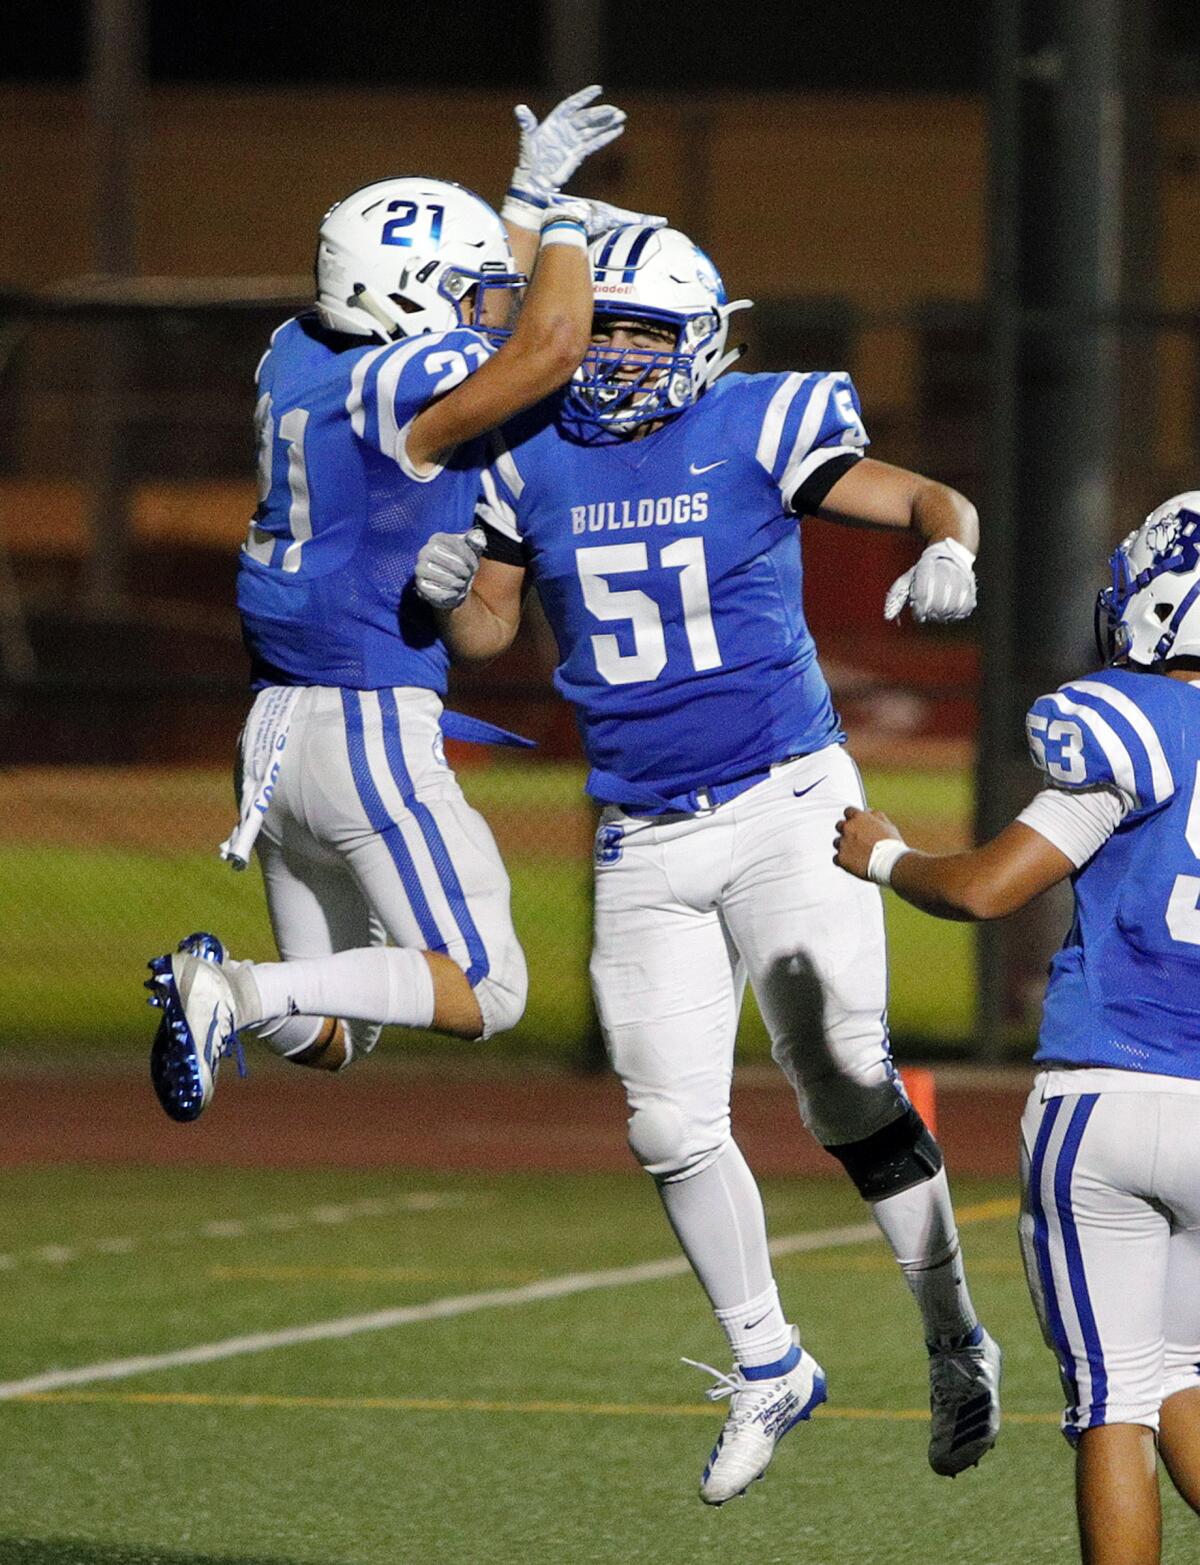 Burbank's Tyler Murphy celebrates a touchdown he scored against Pasadena with Burbank's Danny Akopyan in a Pacific League football game at Memorial Field in Burbank on Tuesday, September 26, 2019.